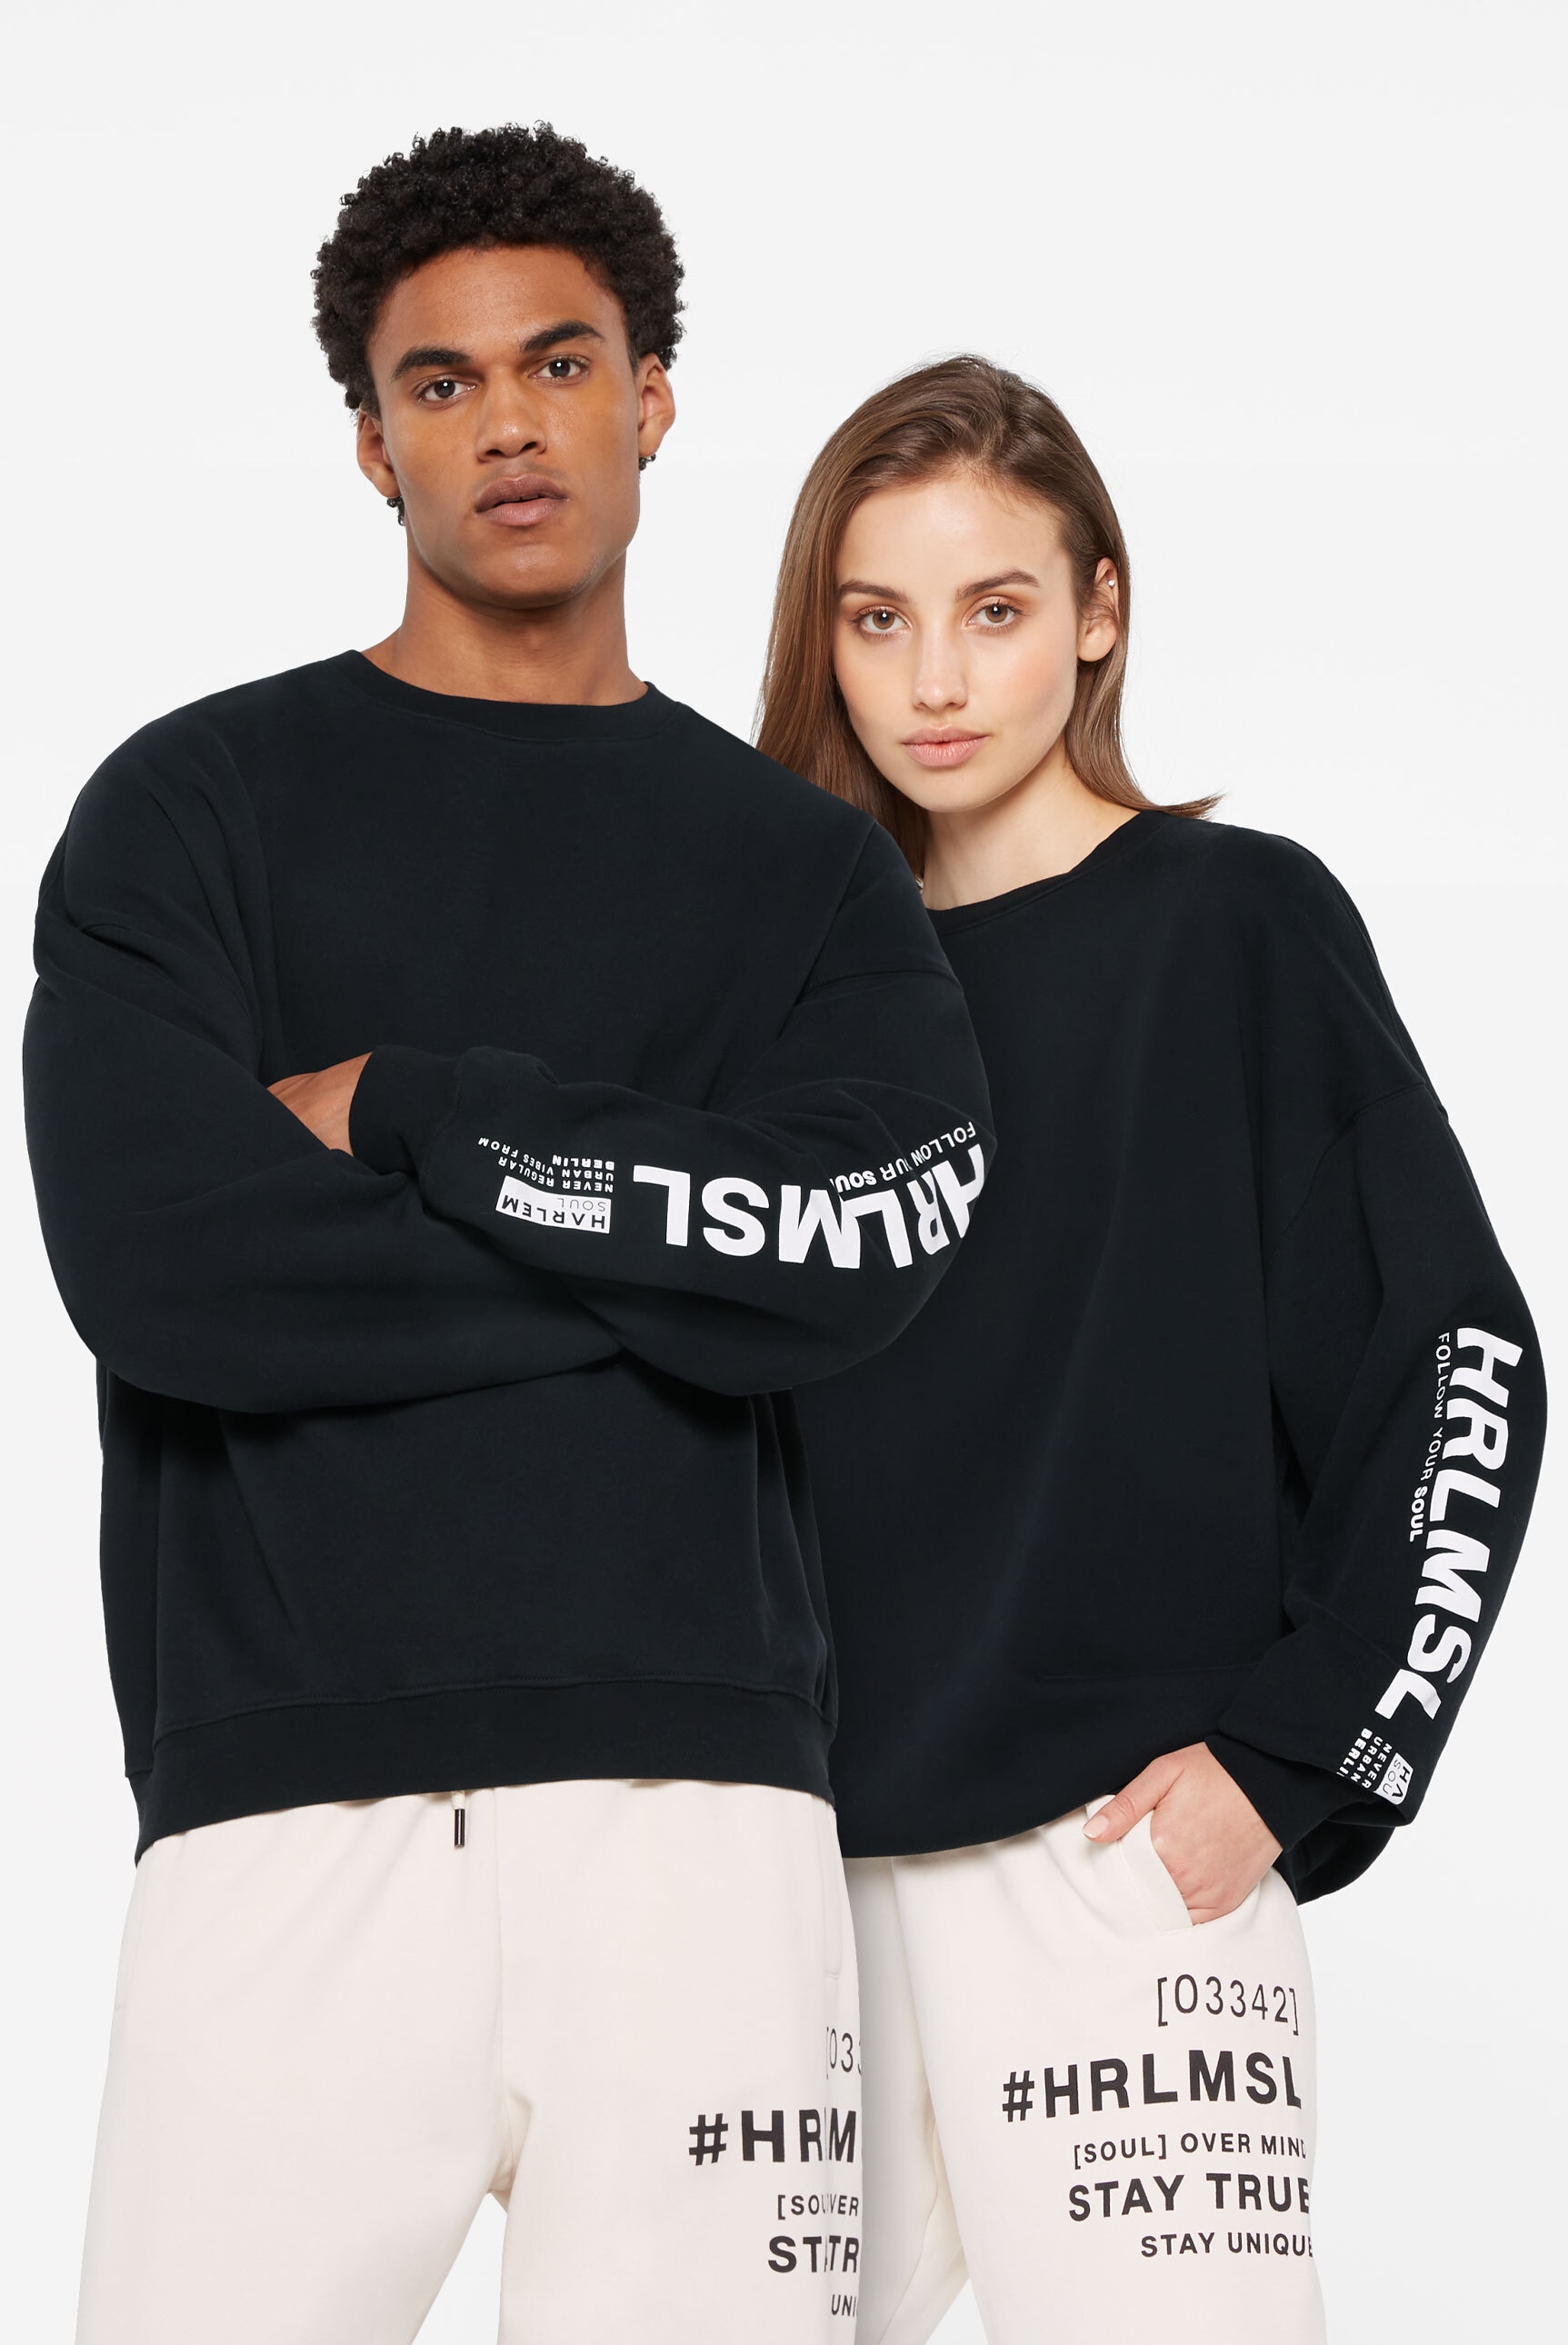 Sweater, mit Lettering